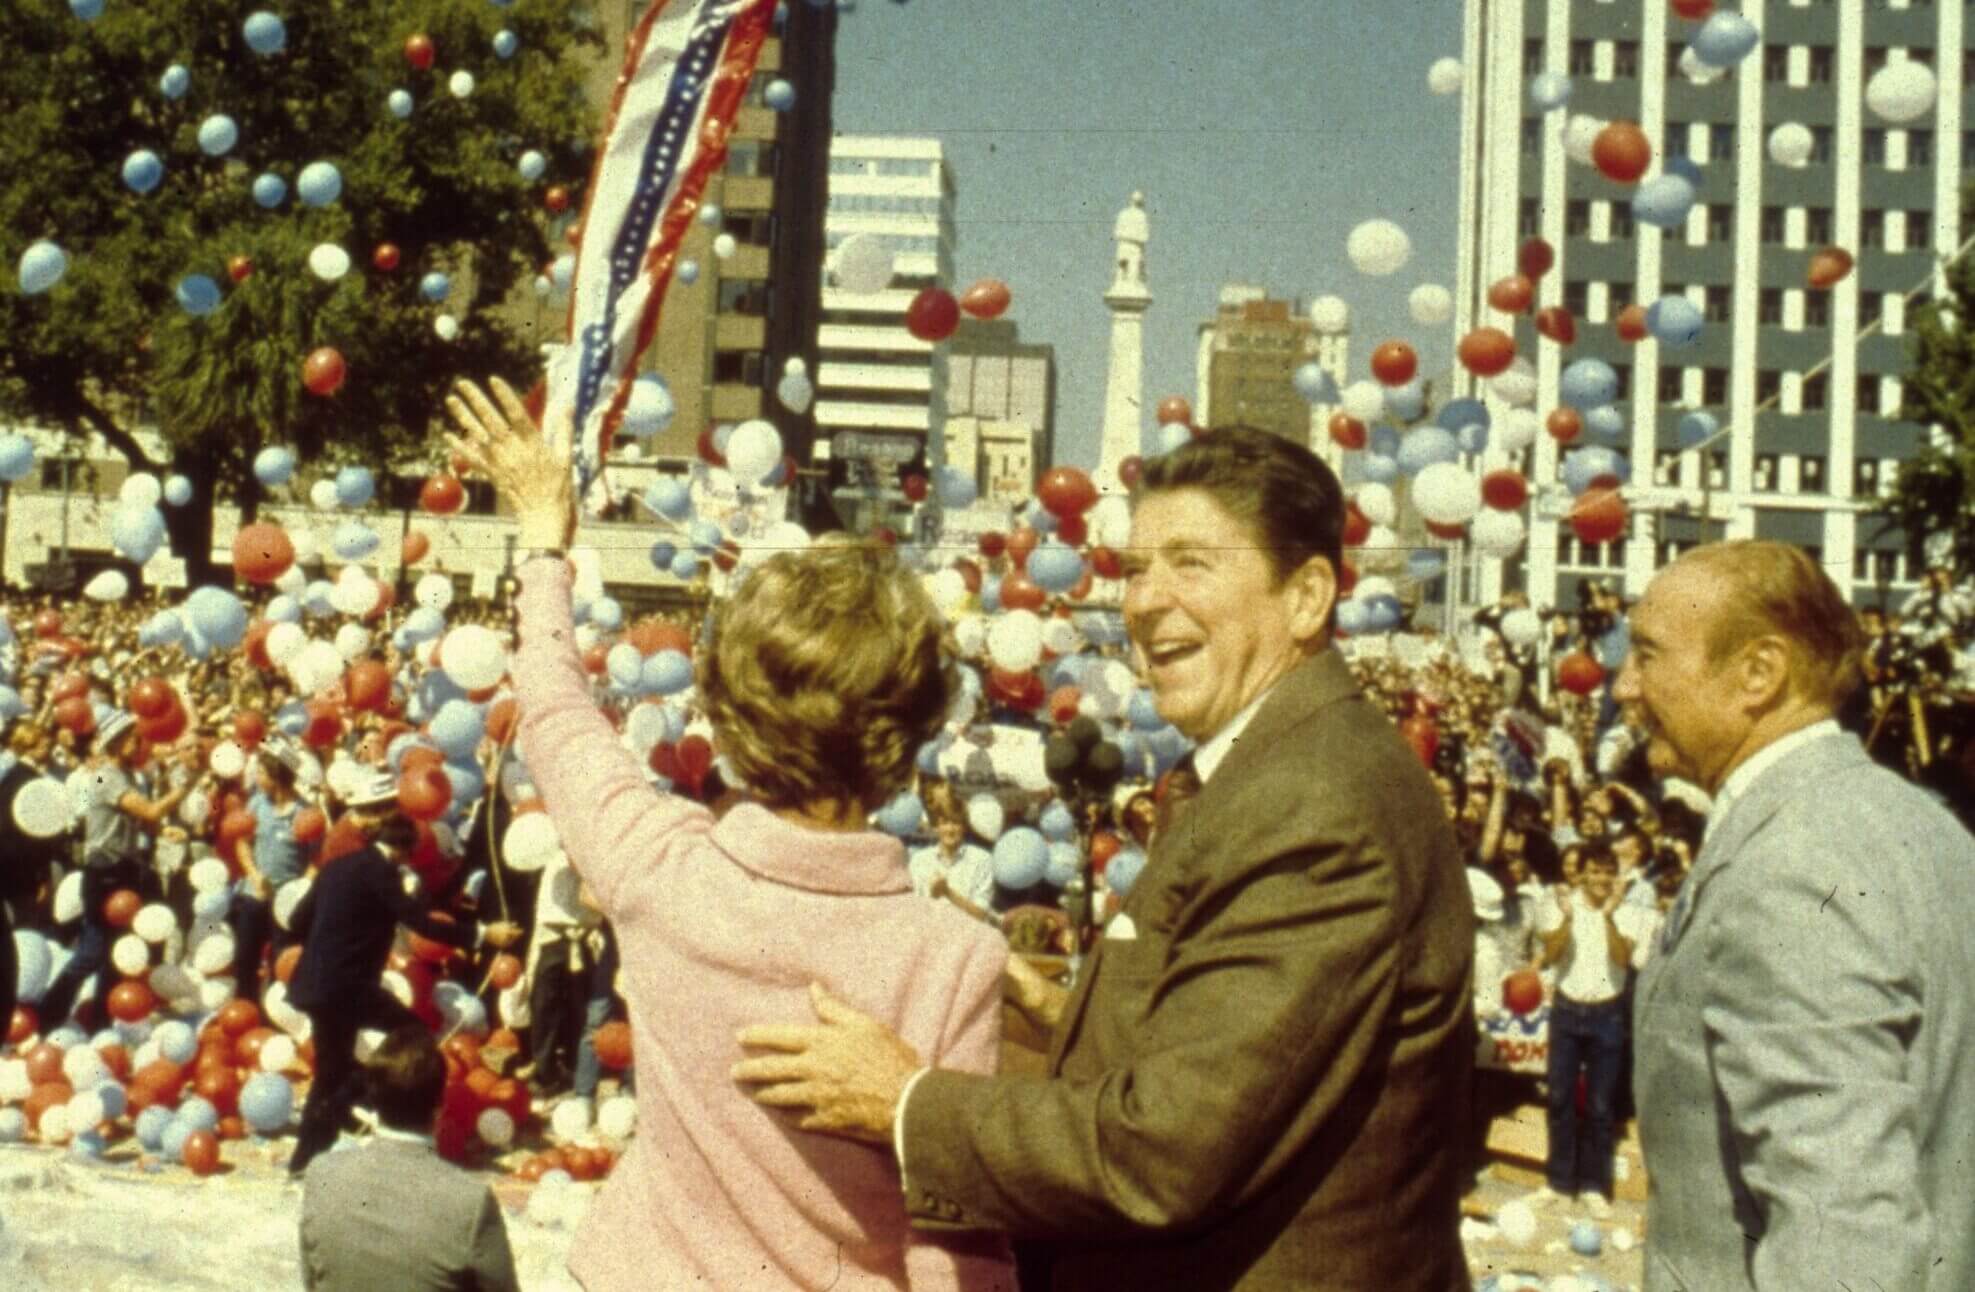 Ronald Reagan, Nancy Reagan, Senator Strom Thurmond to their right during the Presidential campaign (MPI / Getty Images)